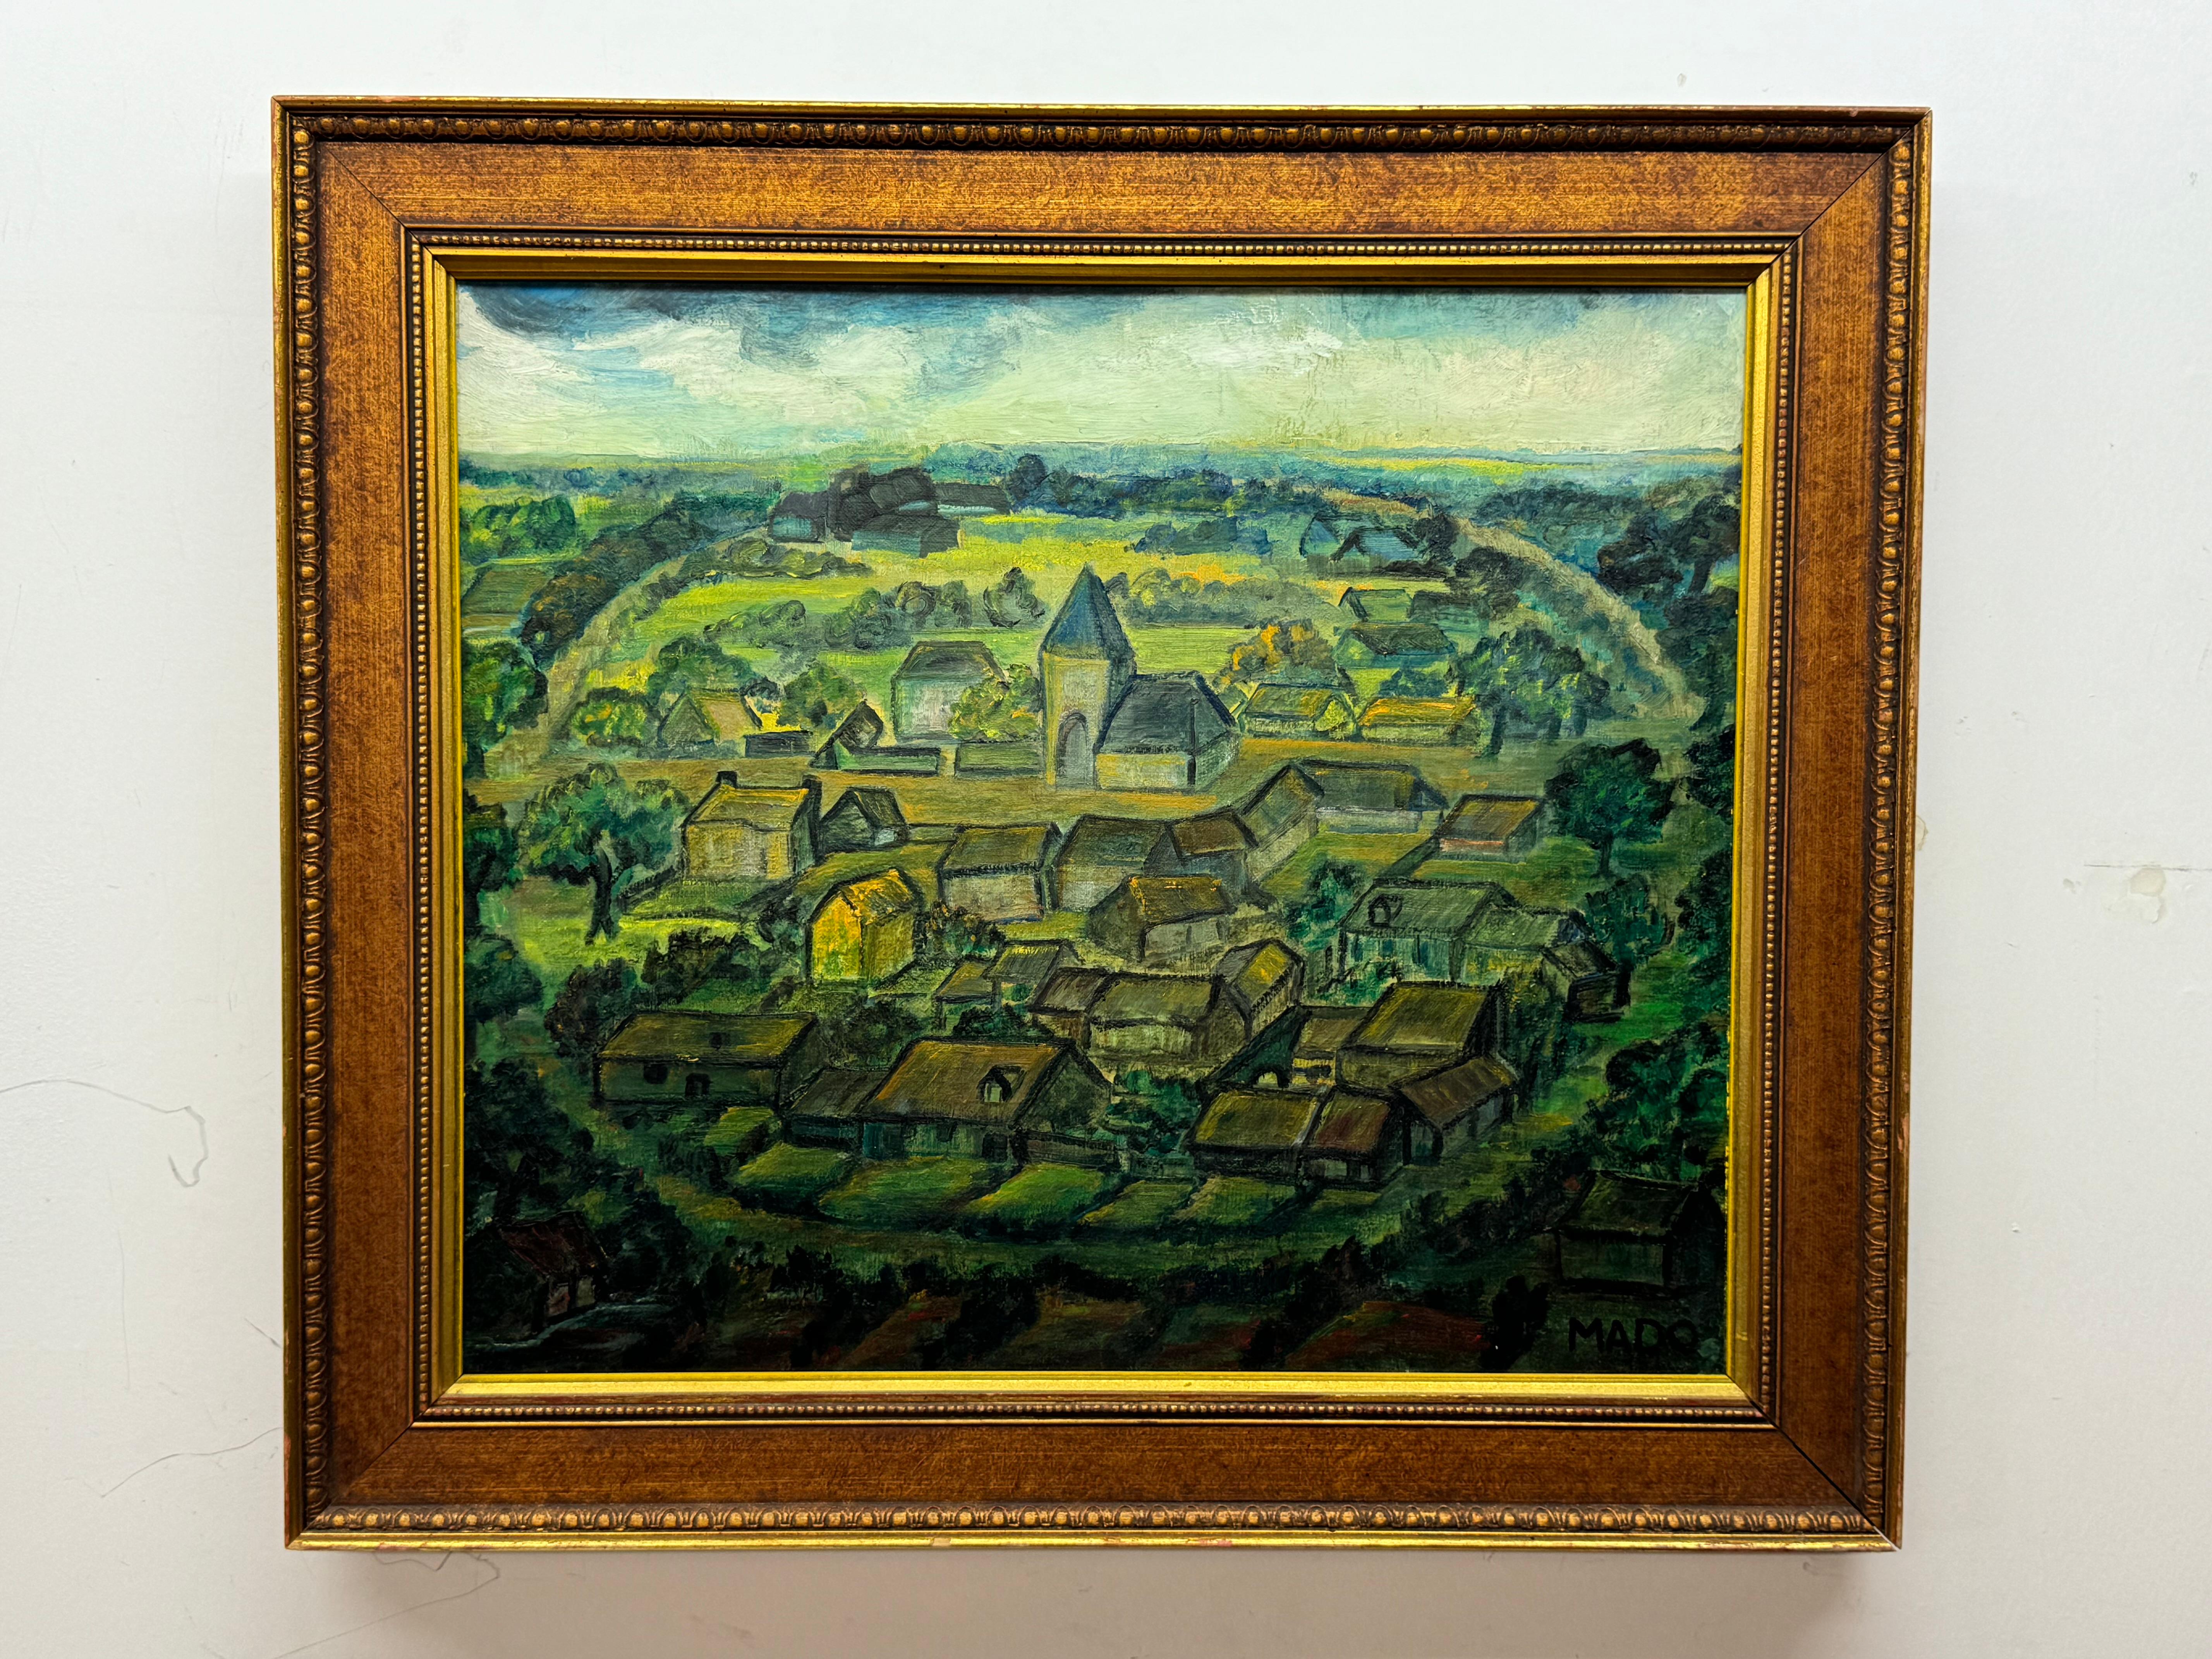 MADO Landscape Painting - Charming village scene painting in a style reminiscing to Cezanne